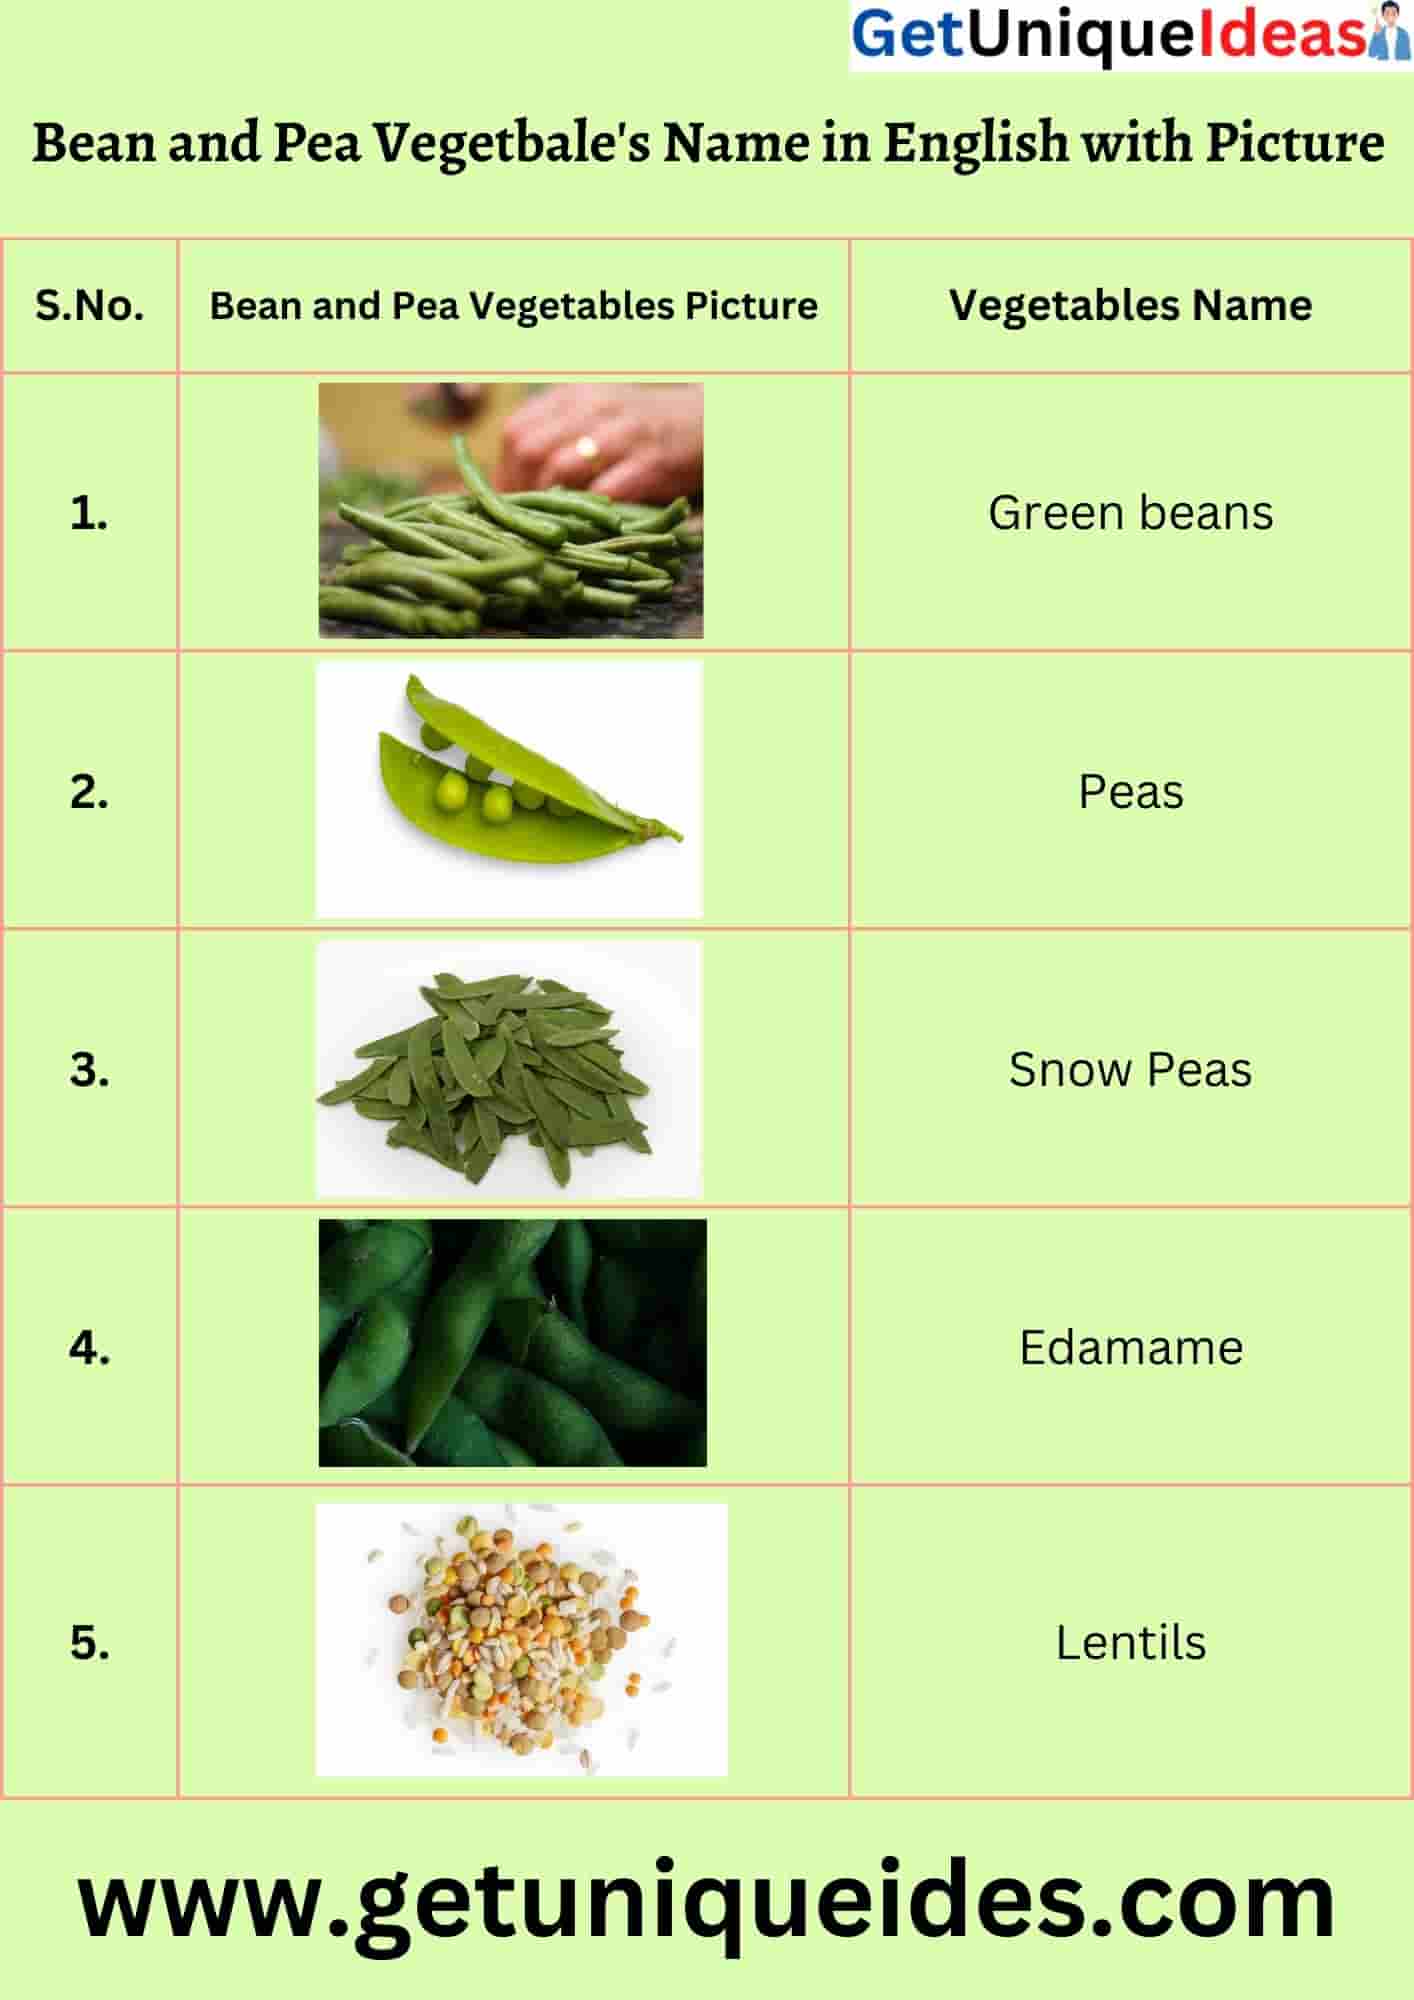 Bean and Pea Vegetable's Name in English with Picture